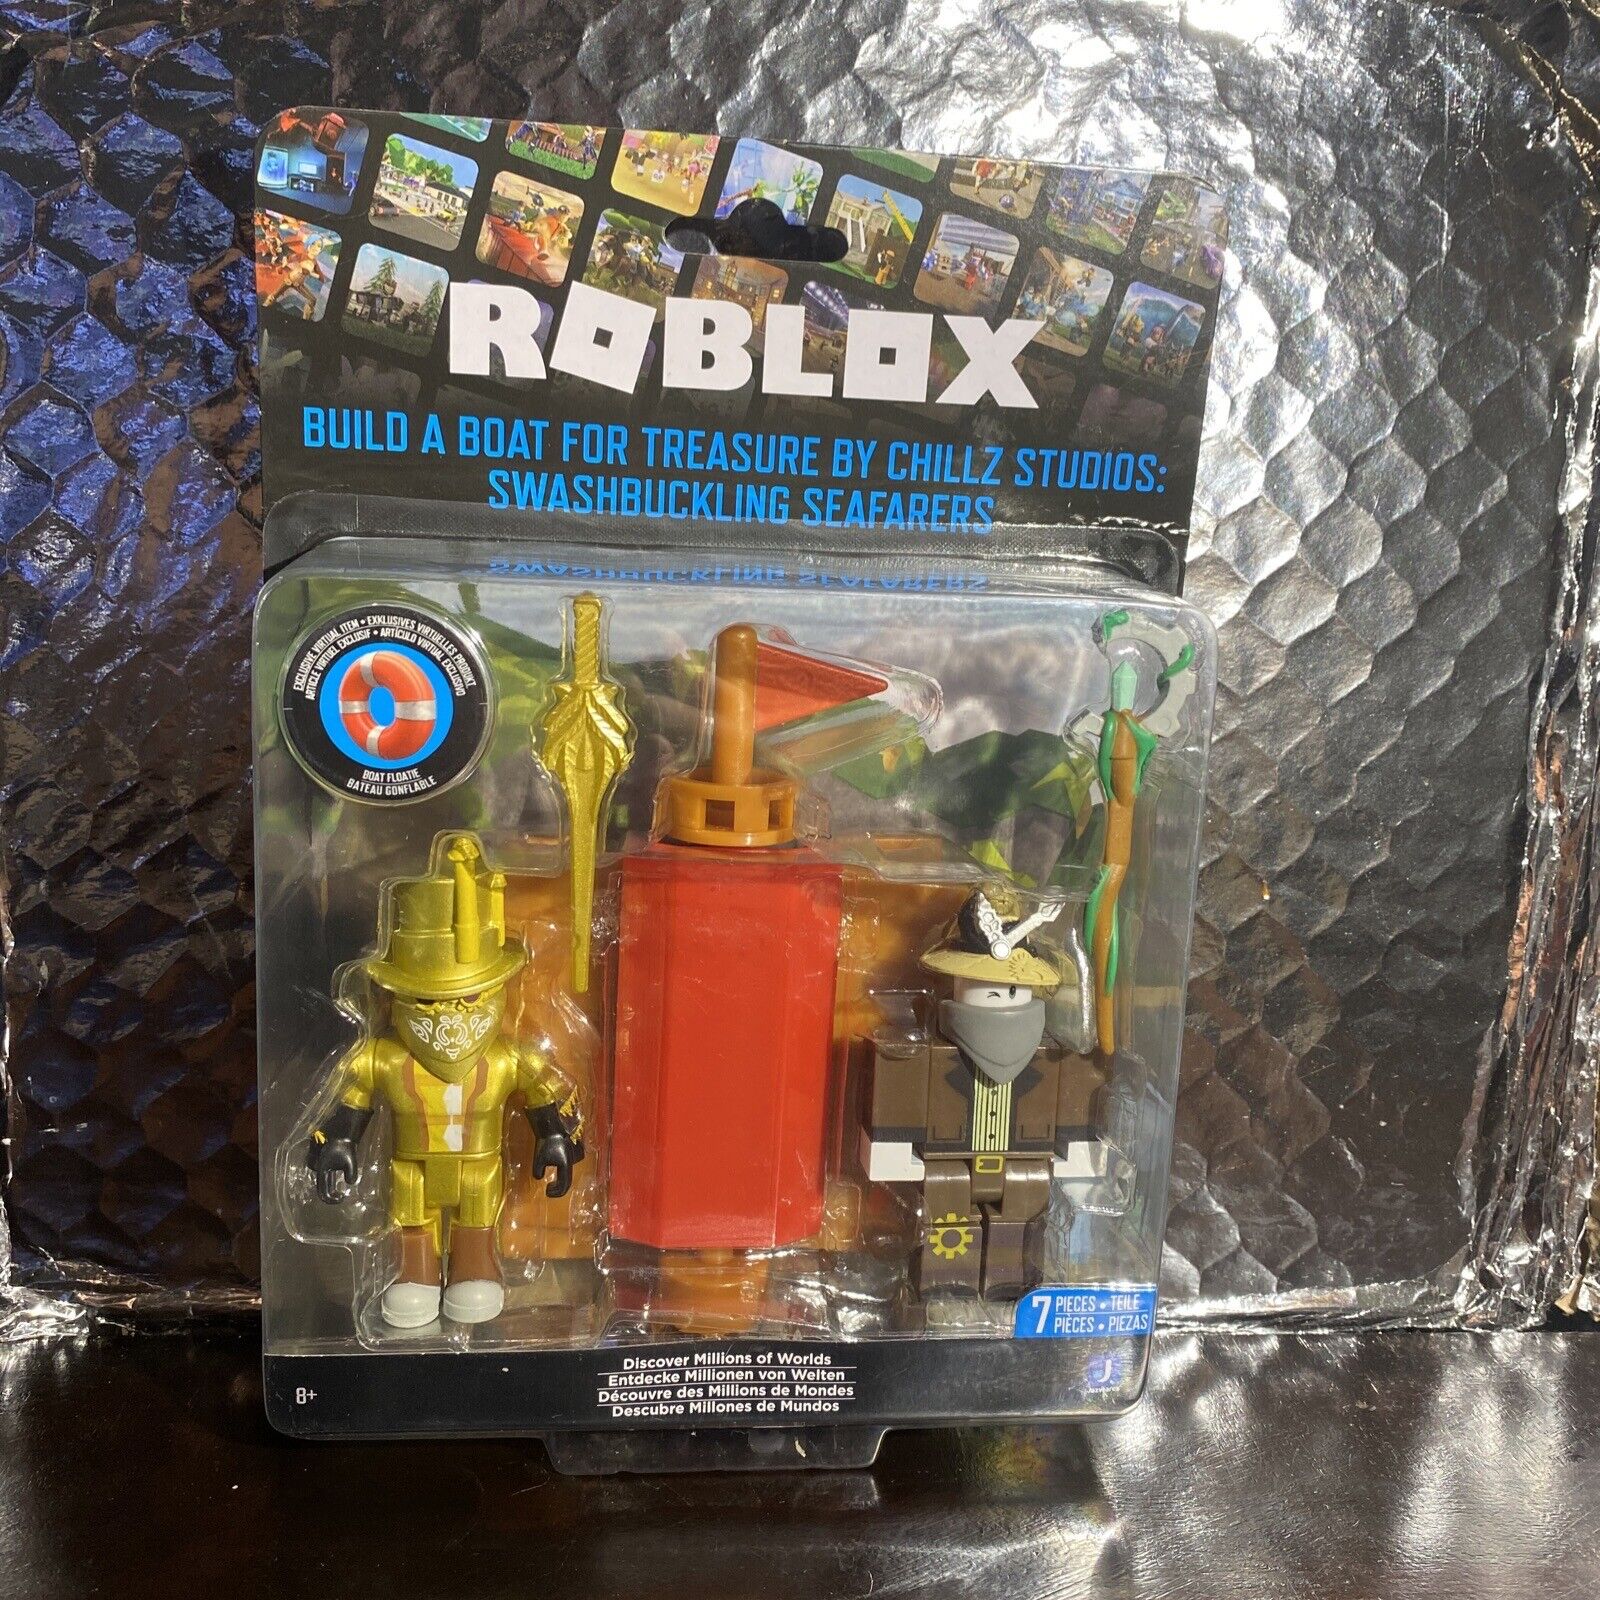 Roblox (10725) Game Pack Assortment for sale online